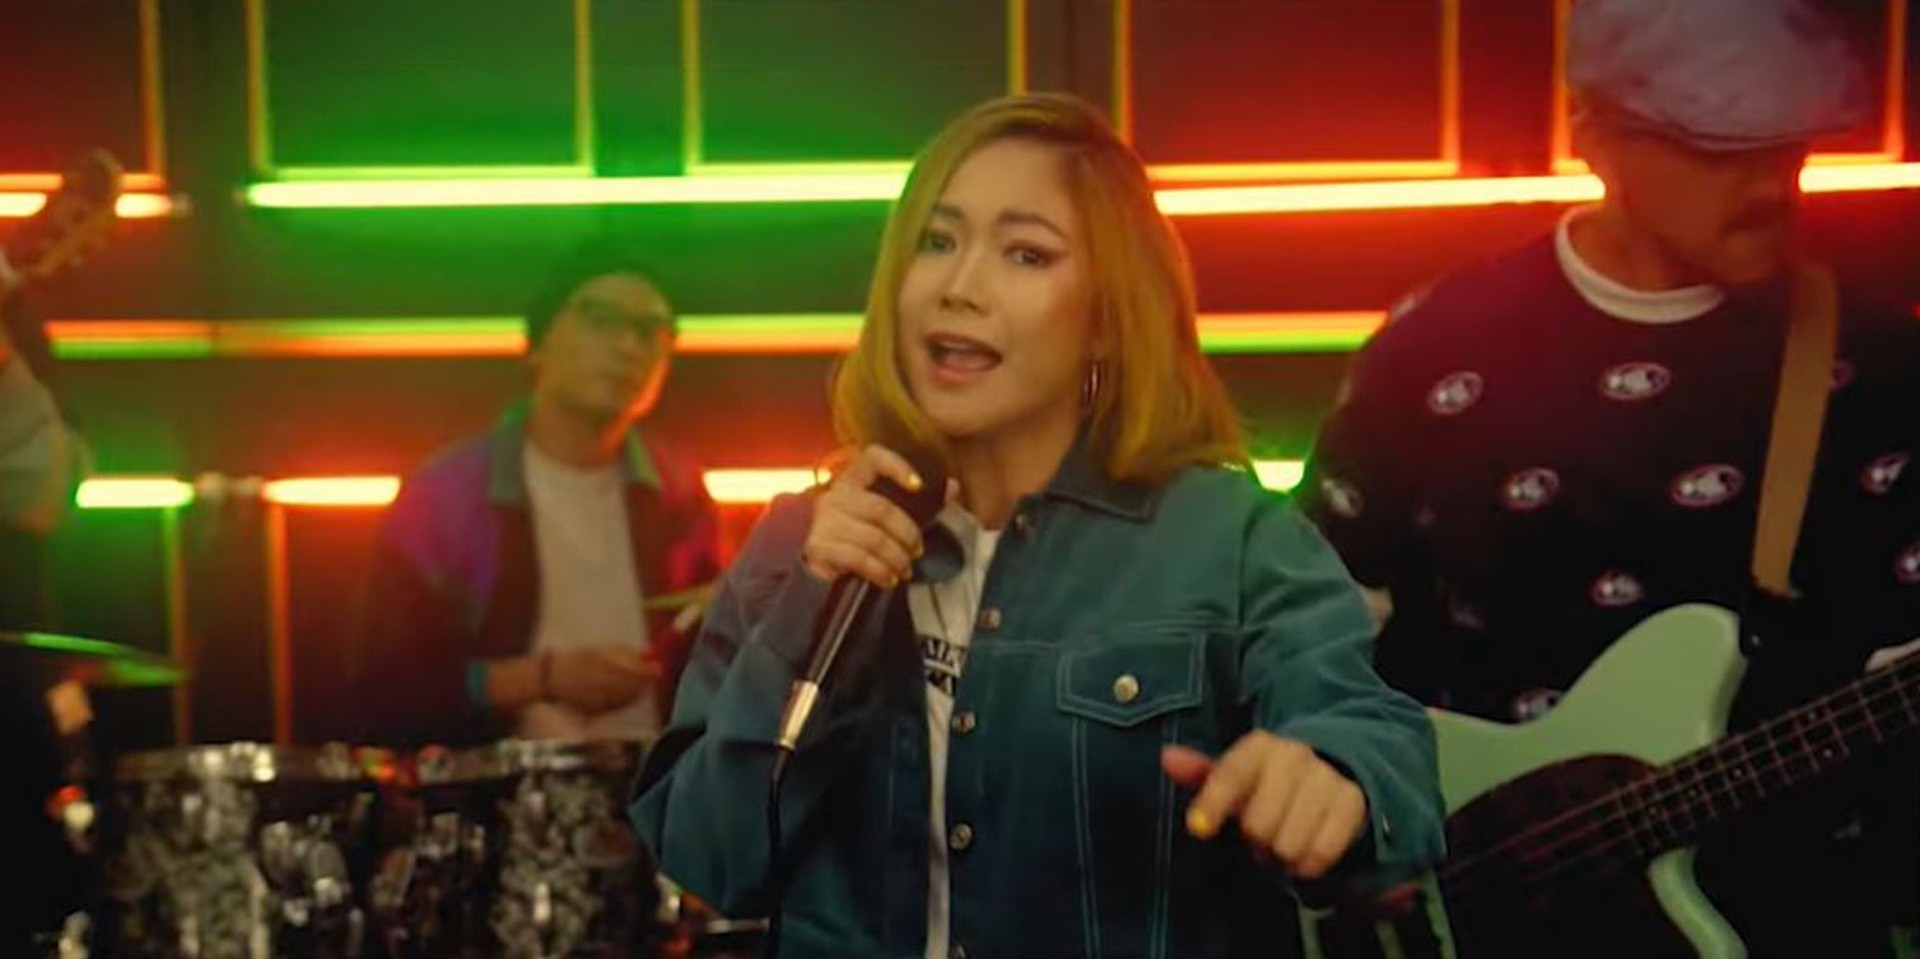 Yeng Constantino returns to her pop-rock roots in 'Sana Na Lang' music video – watch 